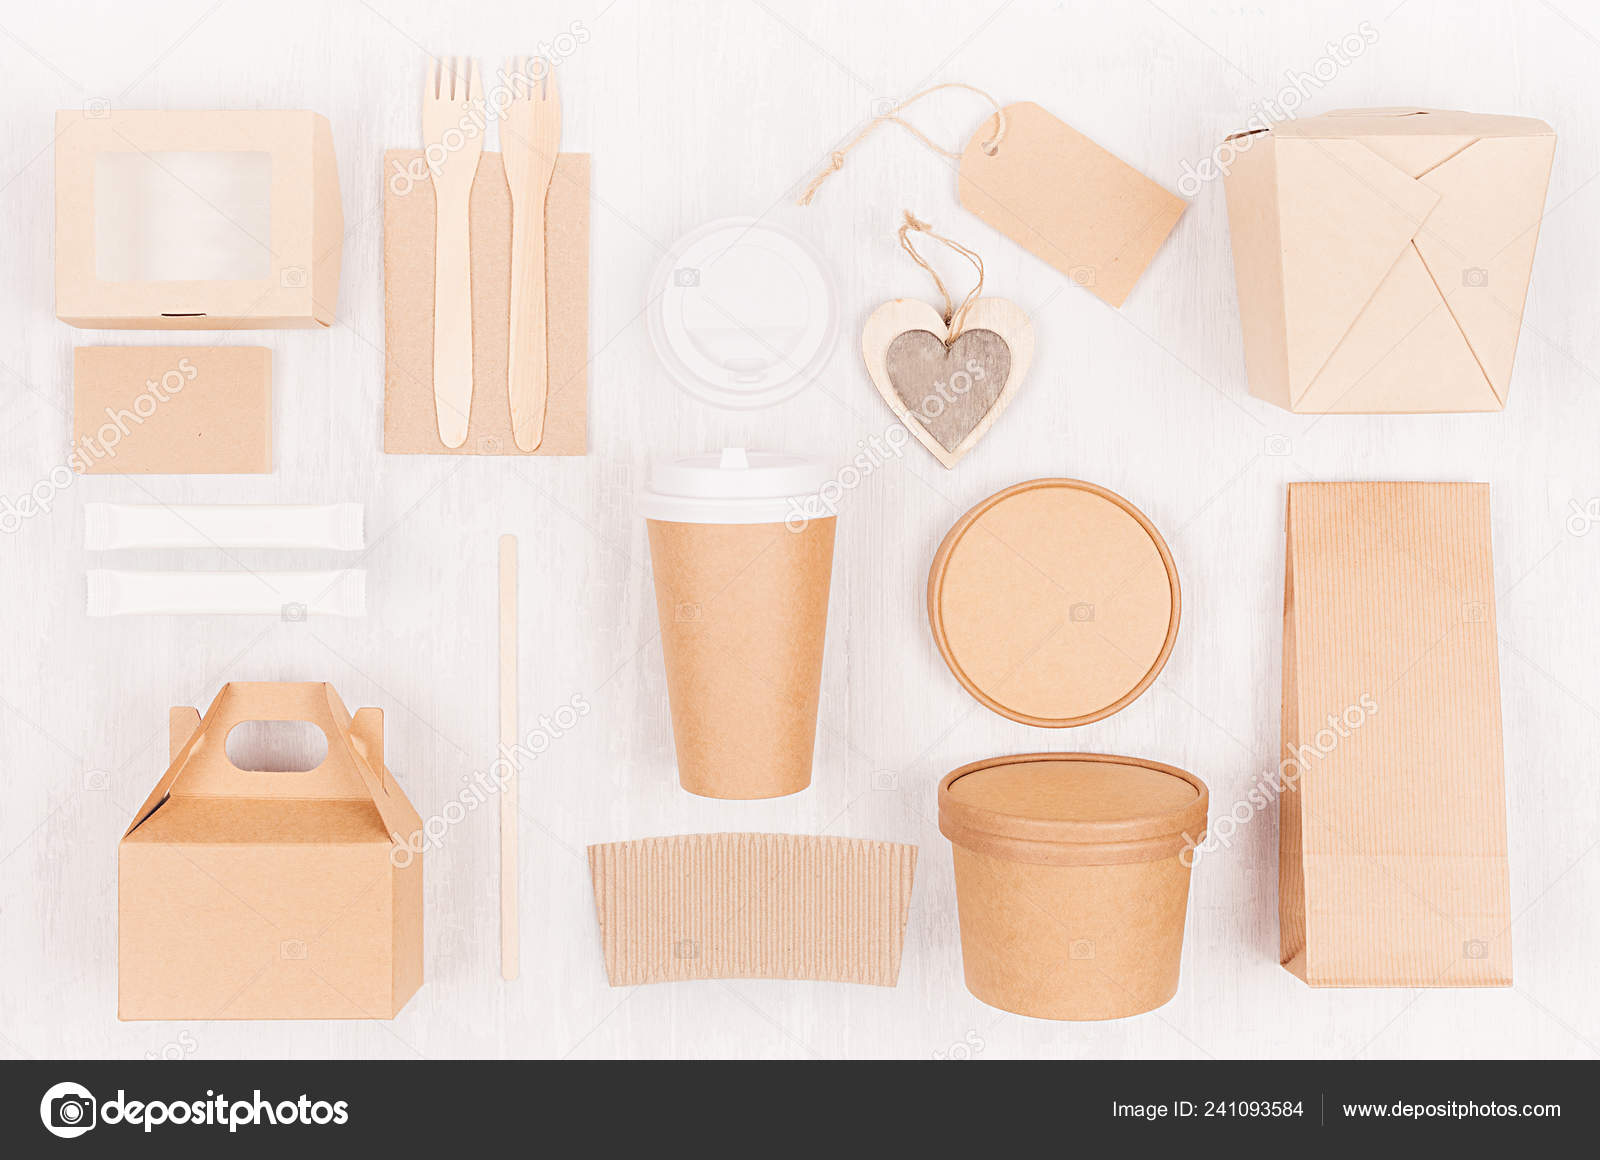 Download Mockup Food Takeaway Packaging Cafe Restaurant Heart Cardboard Boxes Coffee Stock Photo Image By C Alinayudina 241093584